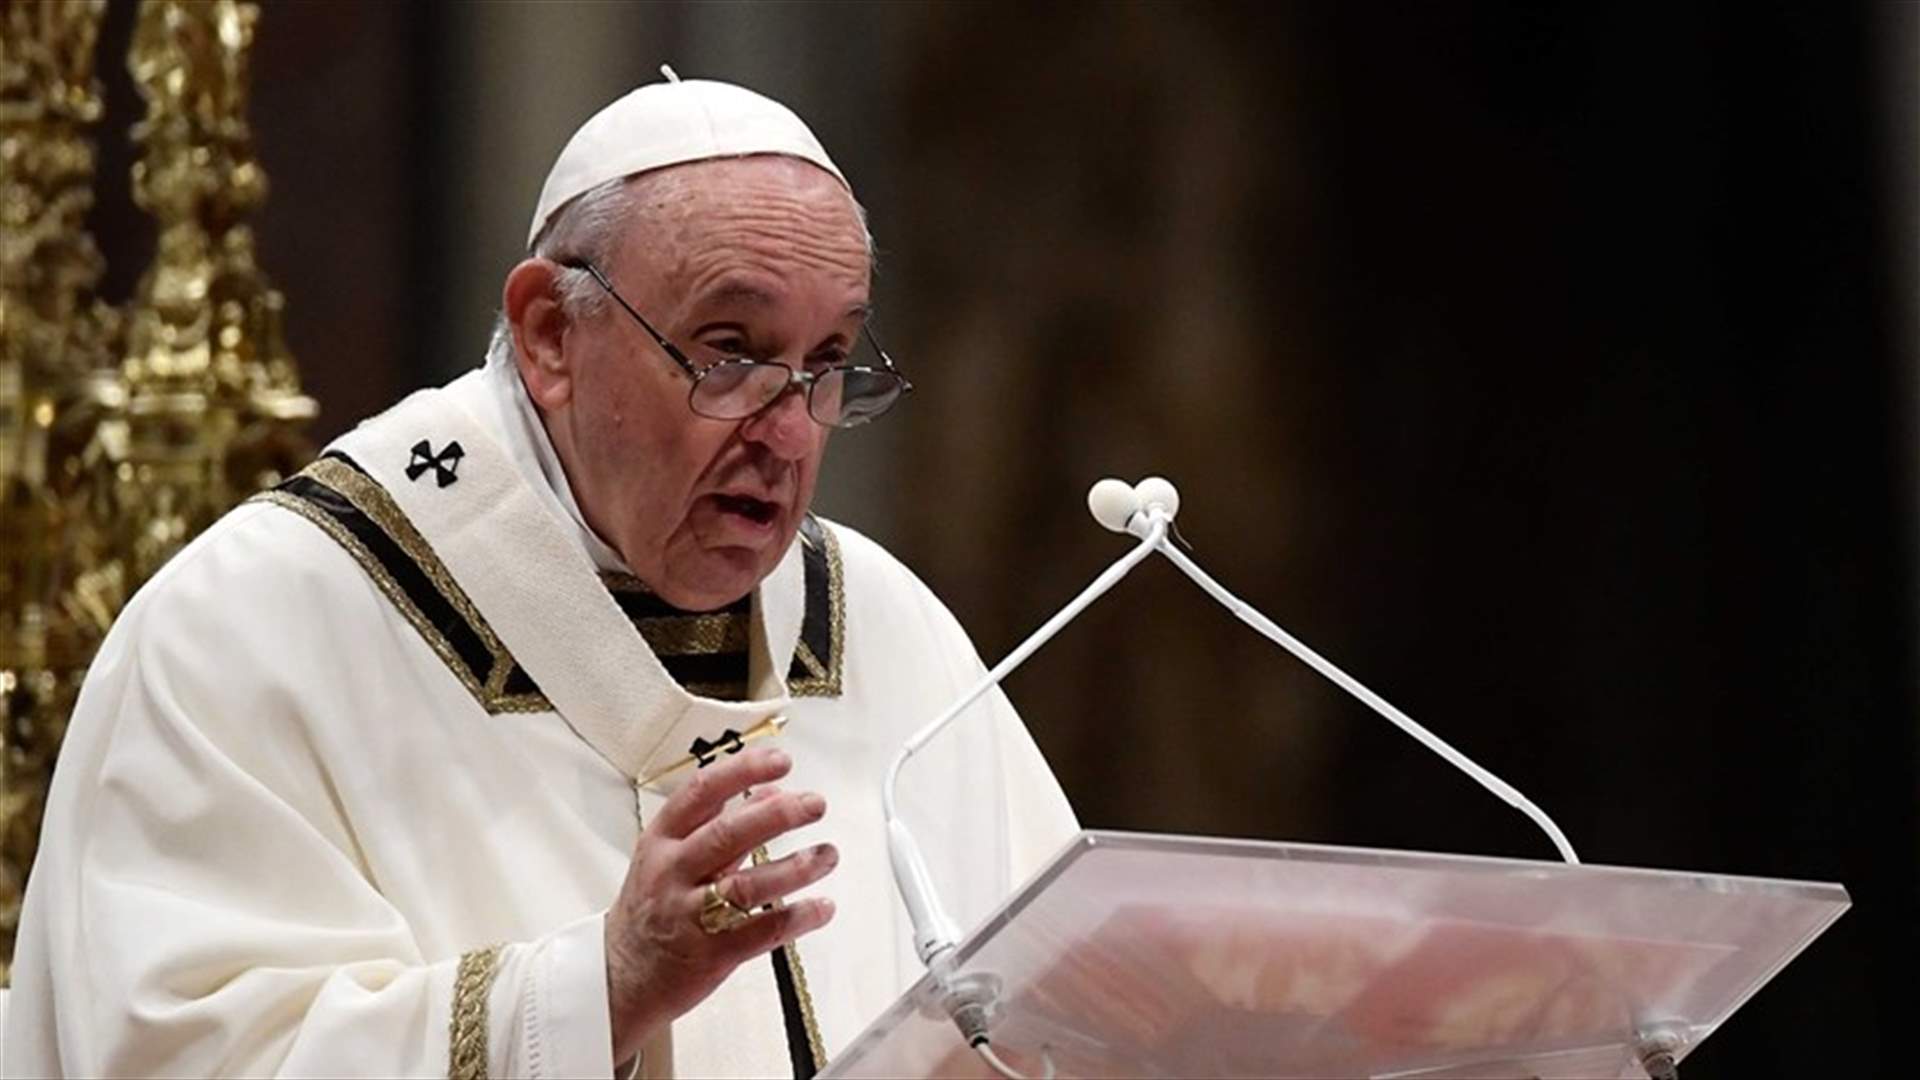 Tourism Minister: Pope did not cancel his visit to Lebanon